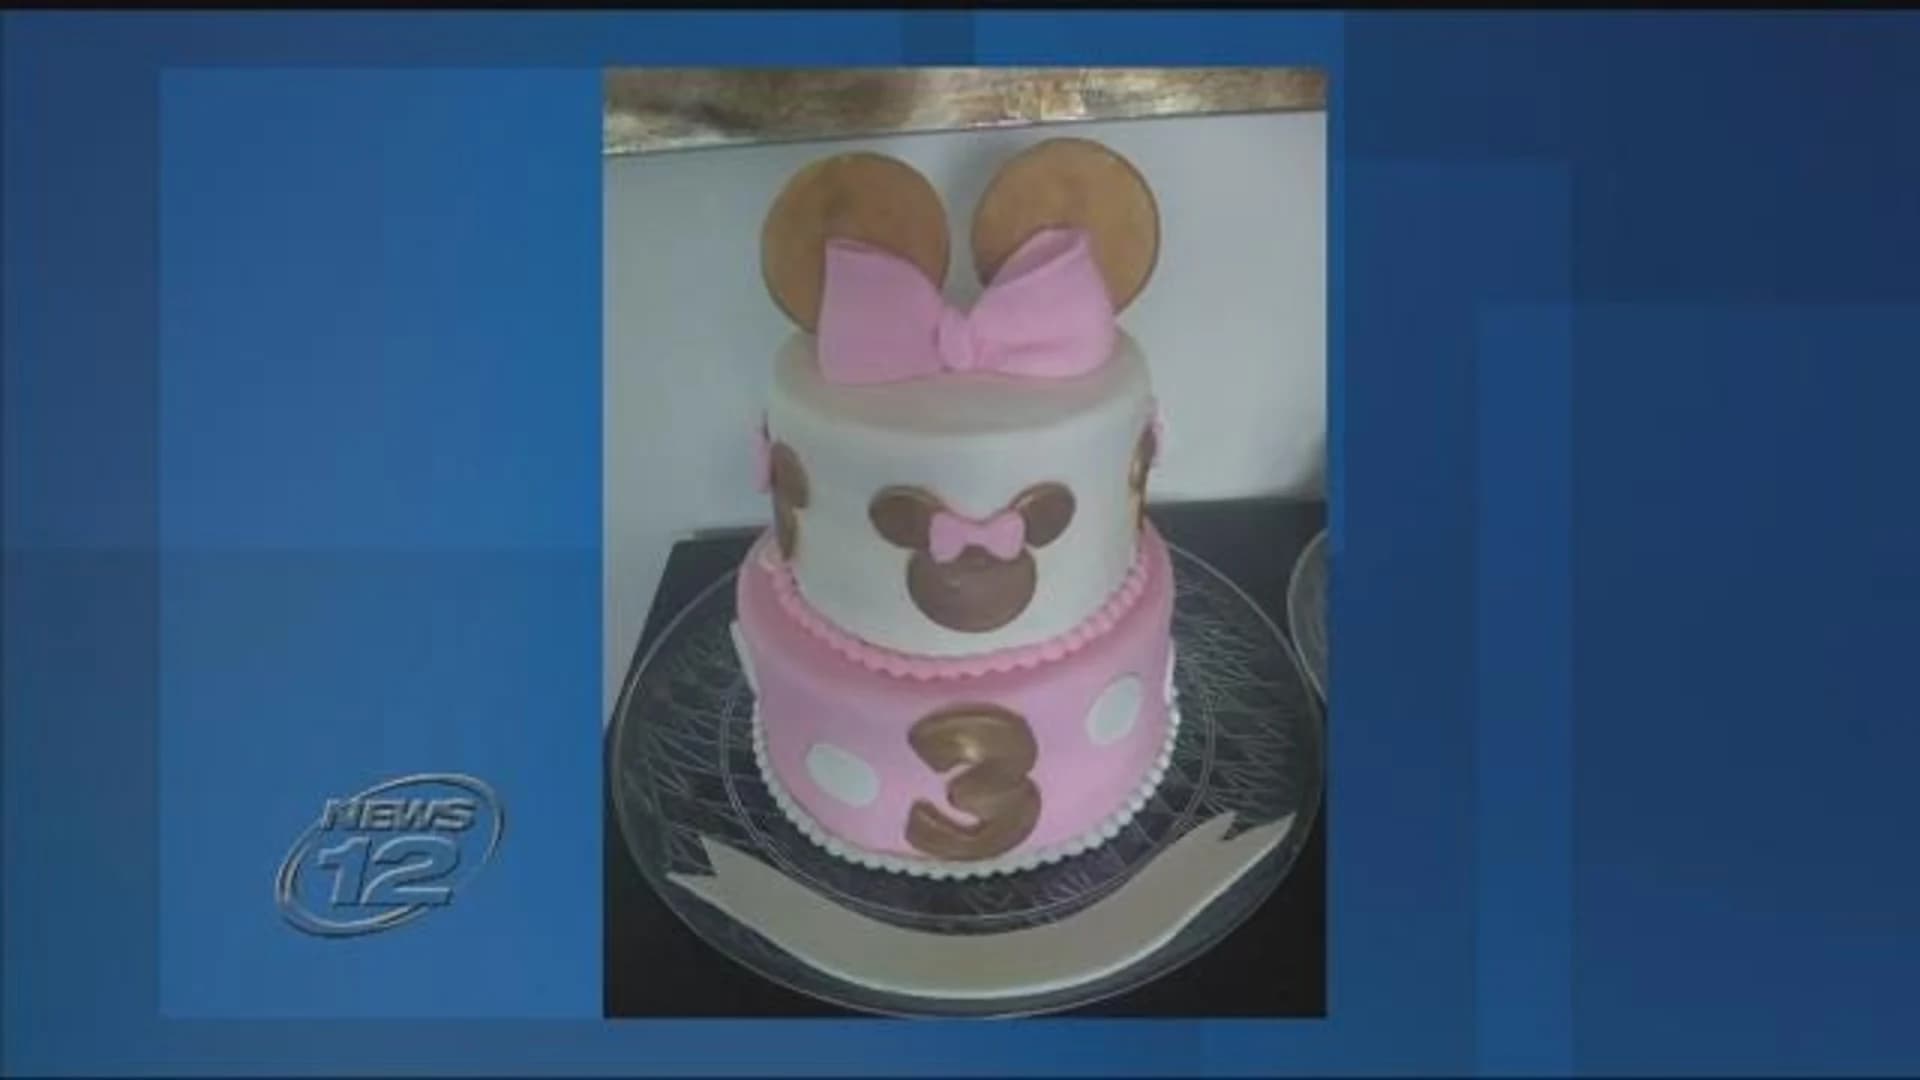 News 12's Most-Viewed: #4 - Baker’s dozen? More than 12 people report Facebook Marketplace baking scam